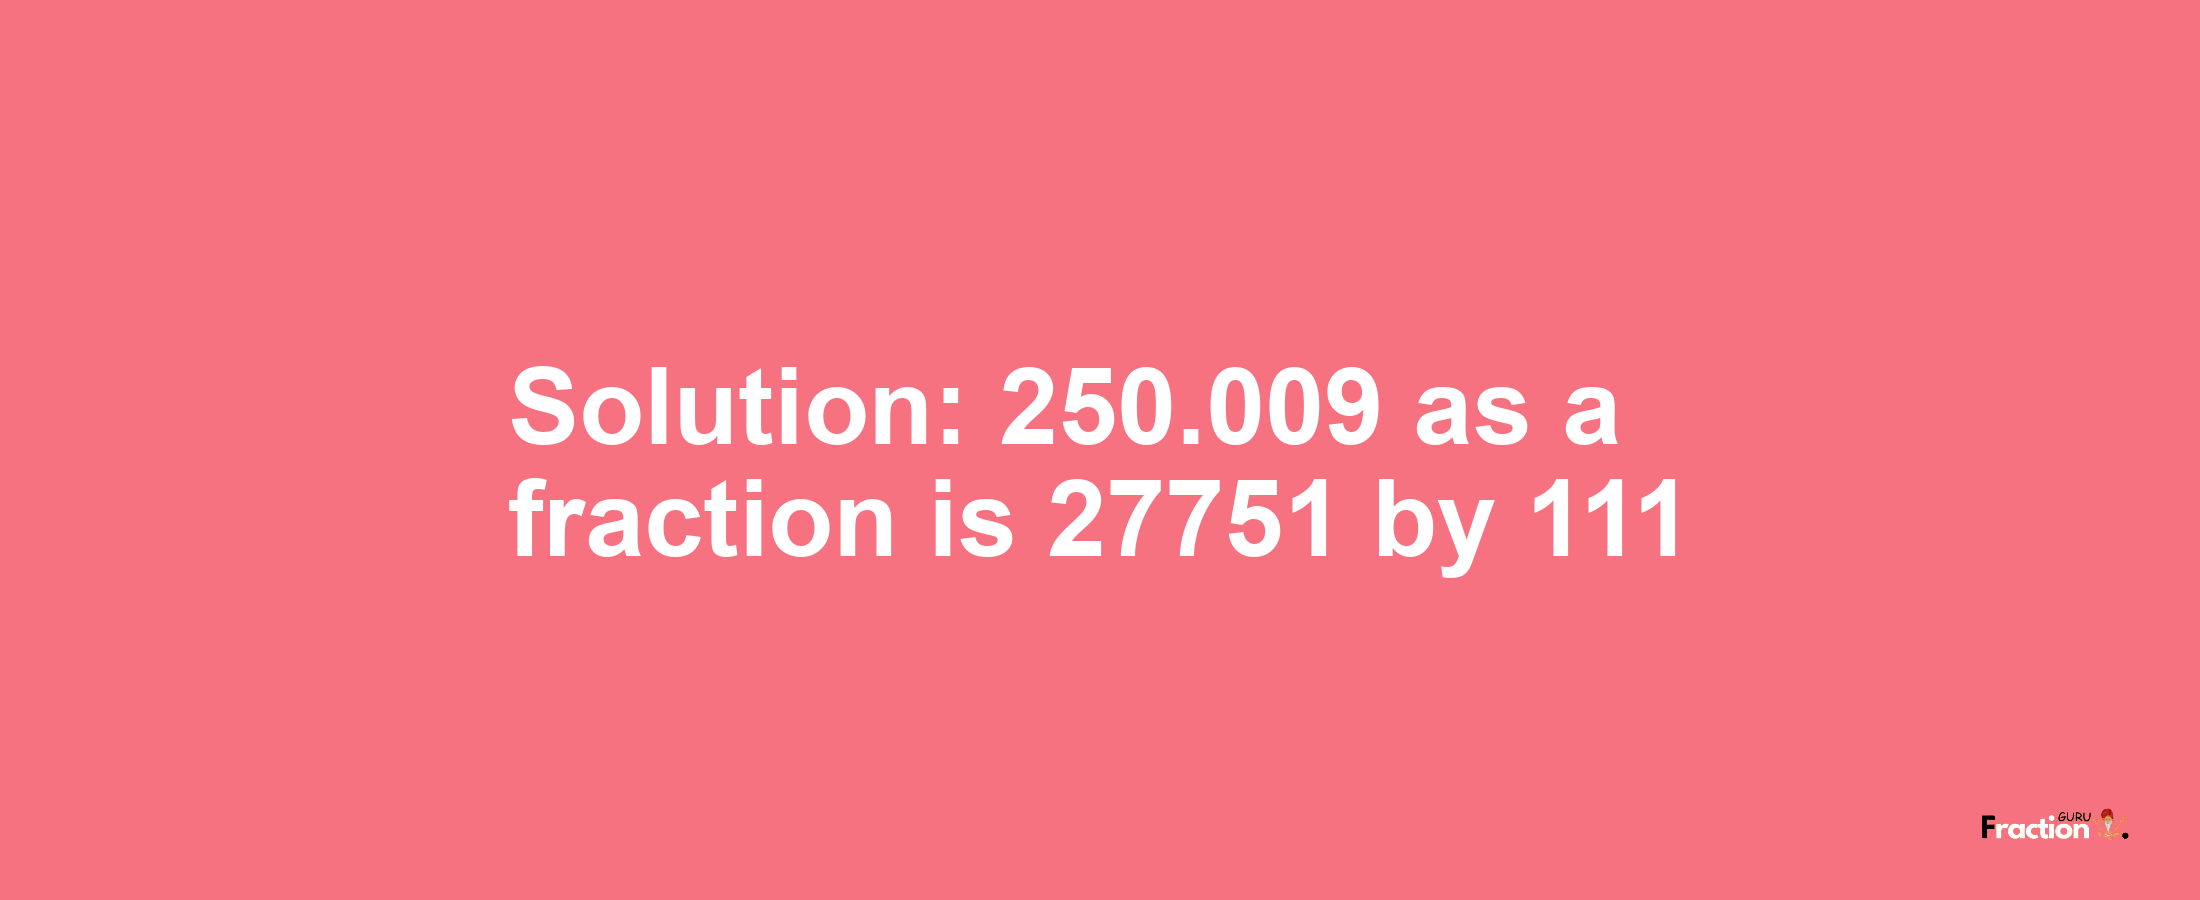 Solution:250.009 as a fraction is 27751/111